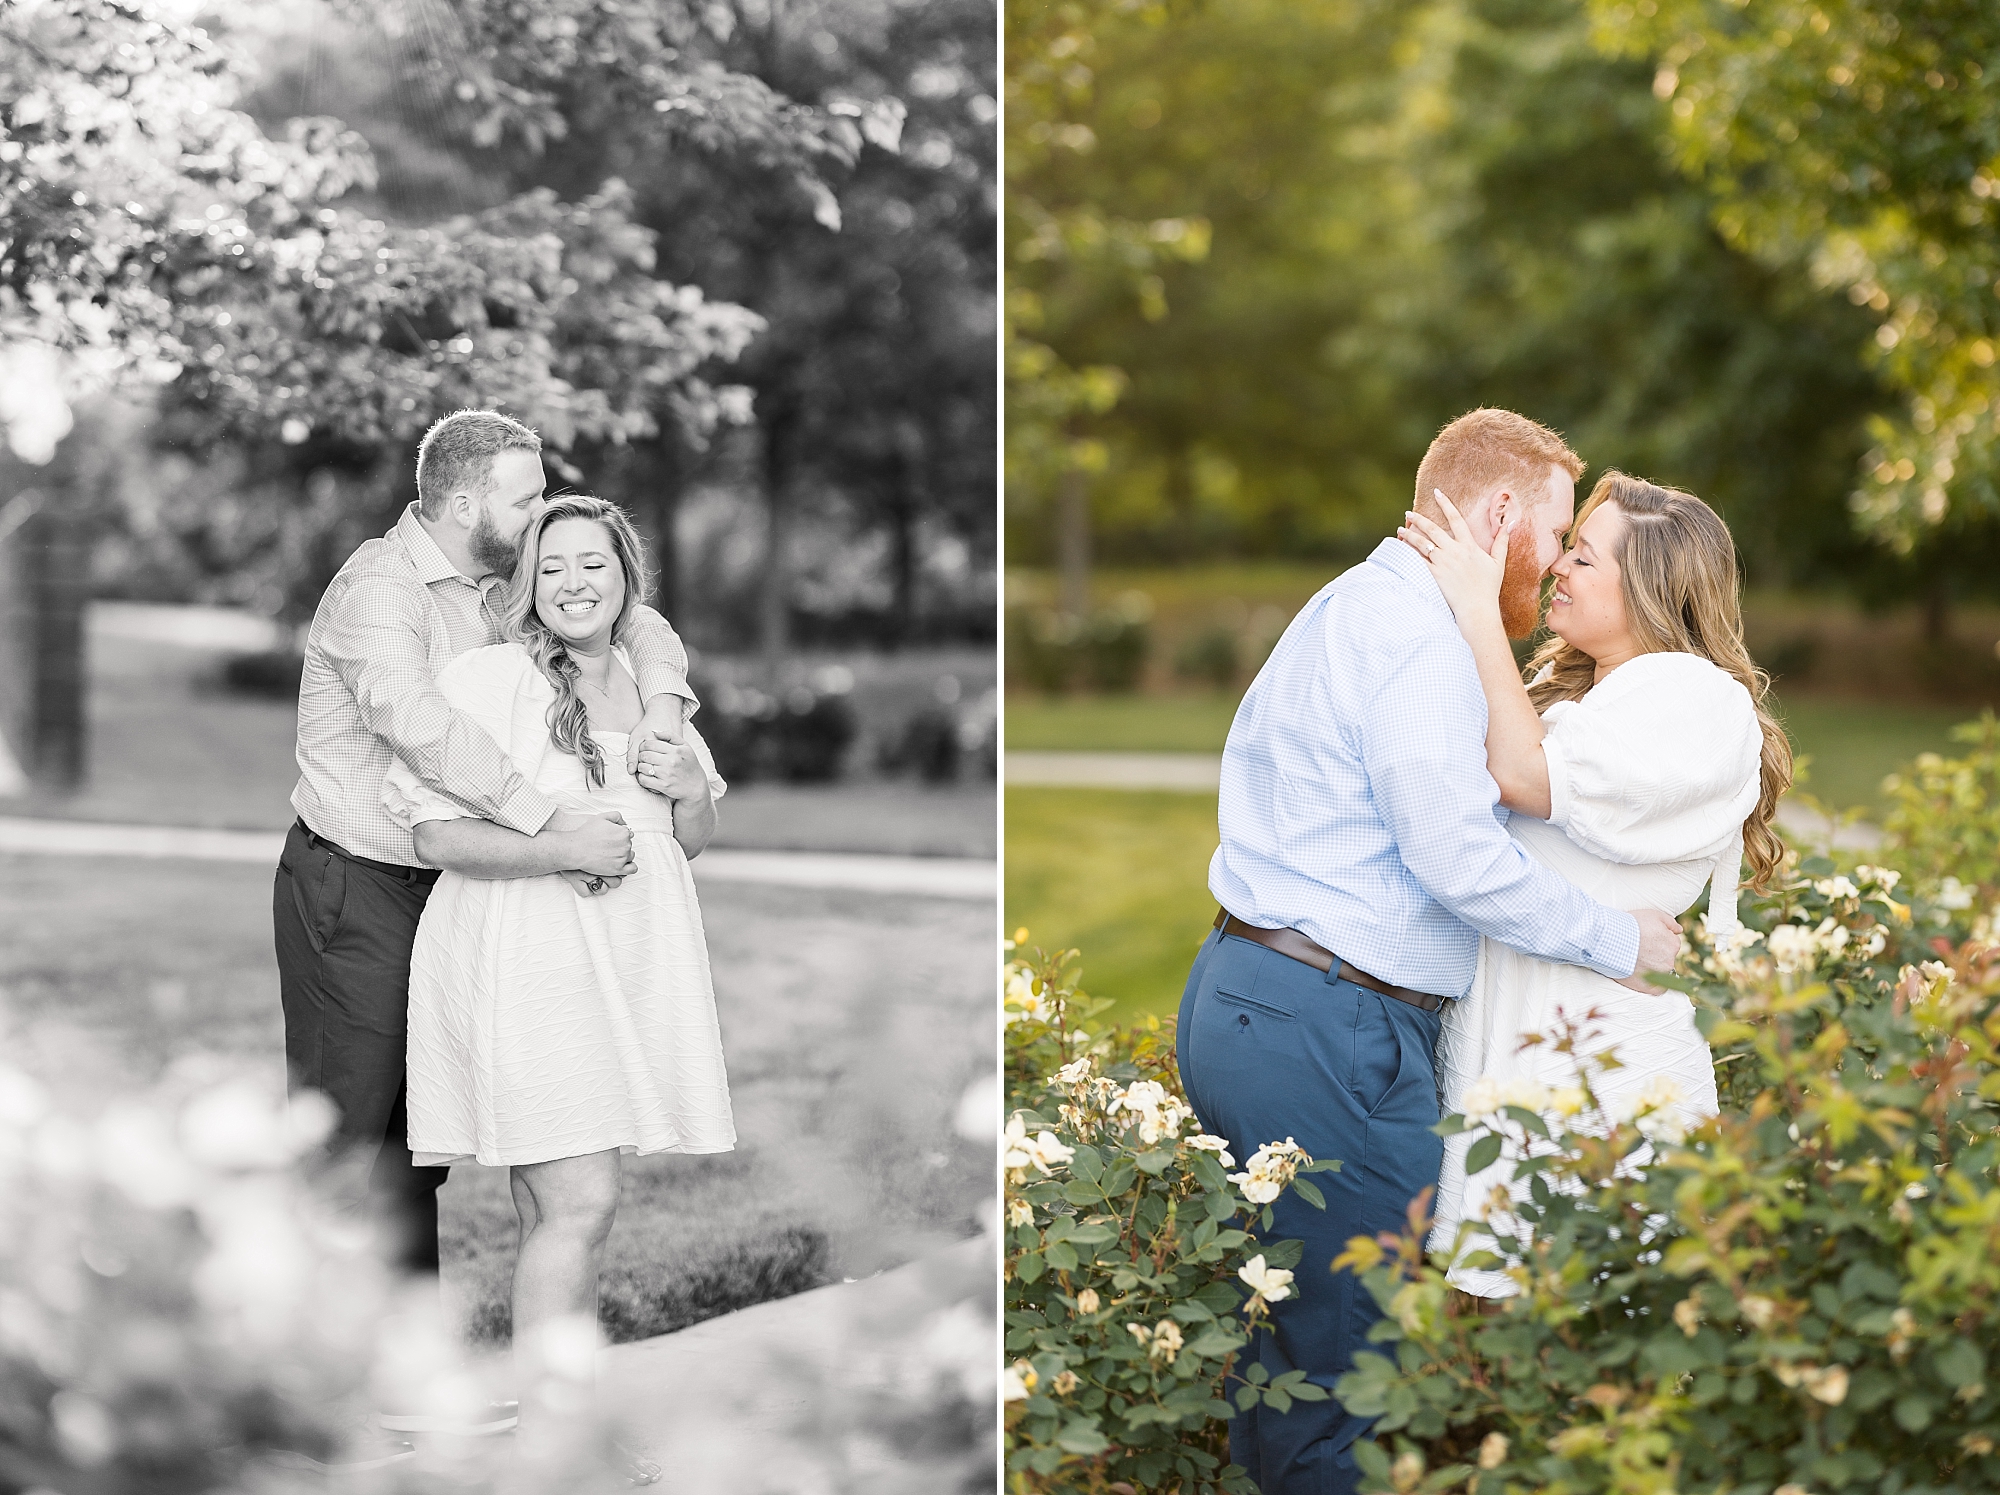 Romantic spring engagement session at the NC Museum of Art Park | Raleigh NC Engagement Photographer